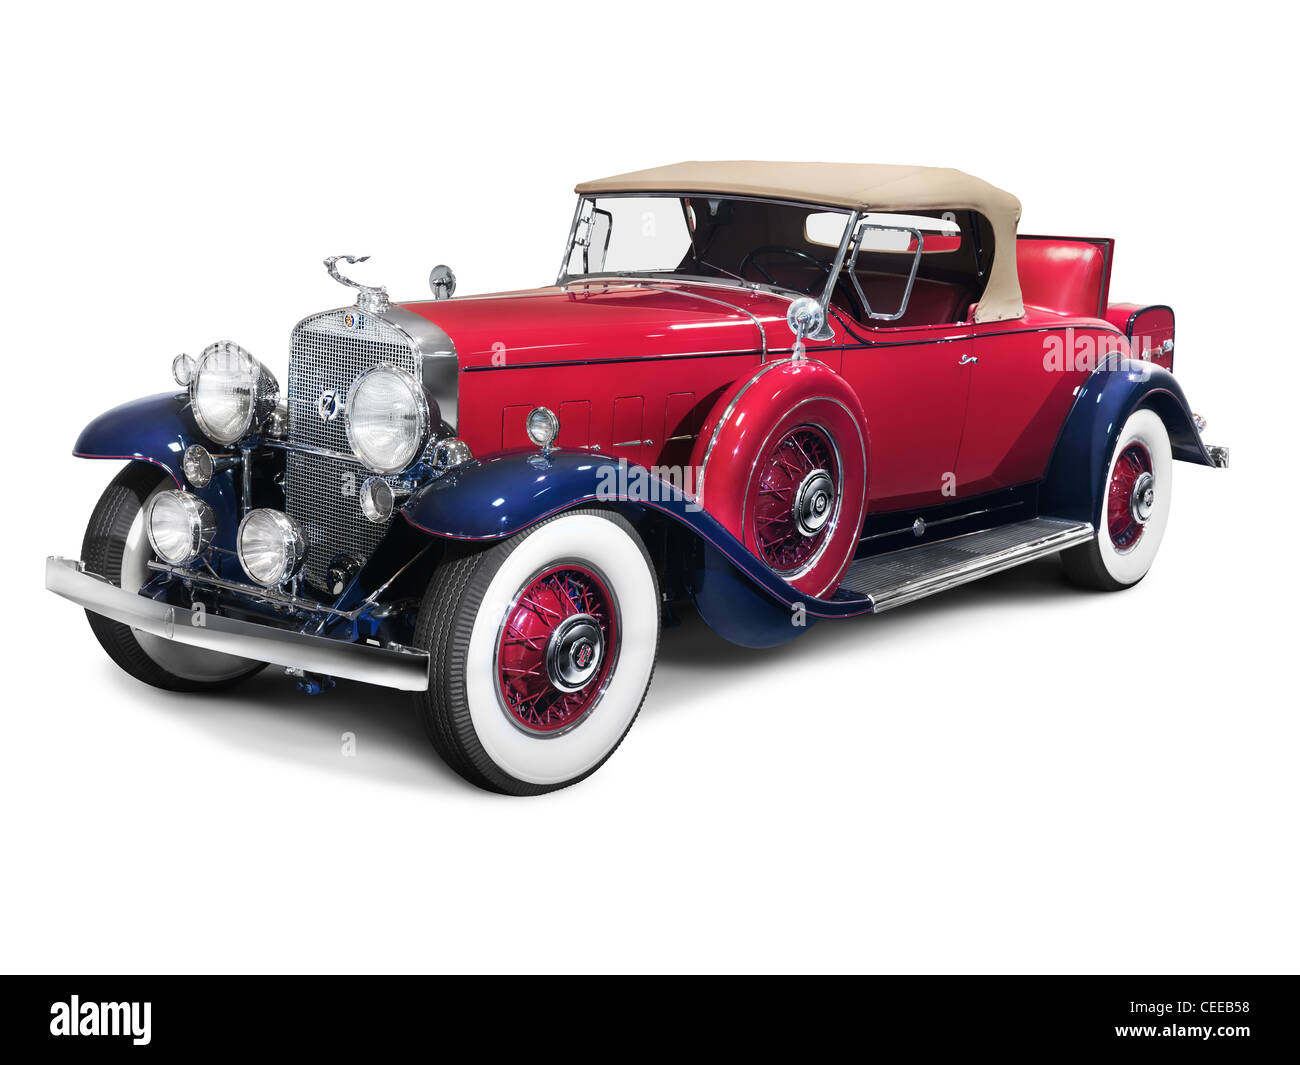 License and prints at MaximImages.com - License and prints at MaximImages.com - Red with blue 1931 Cadillac 452A V-16 Roadster american vintage Stock Photo